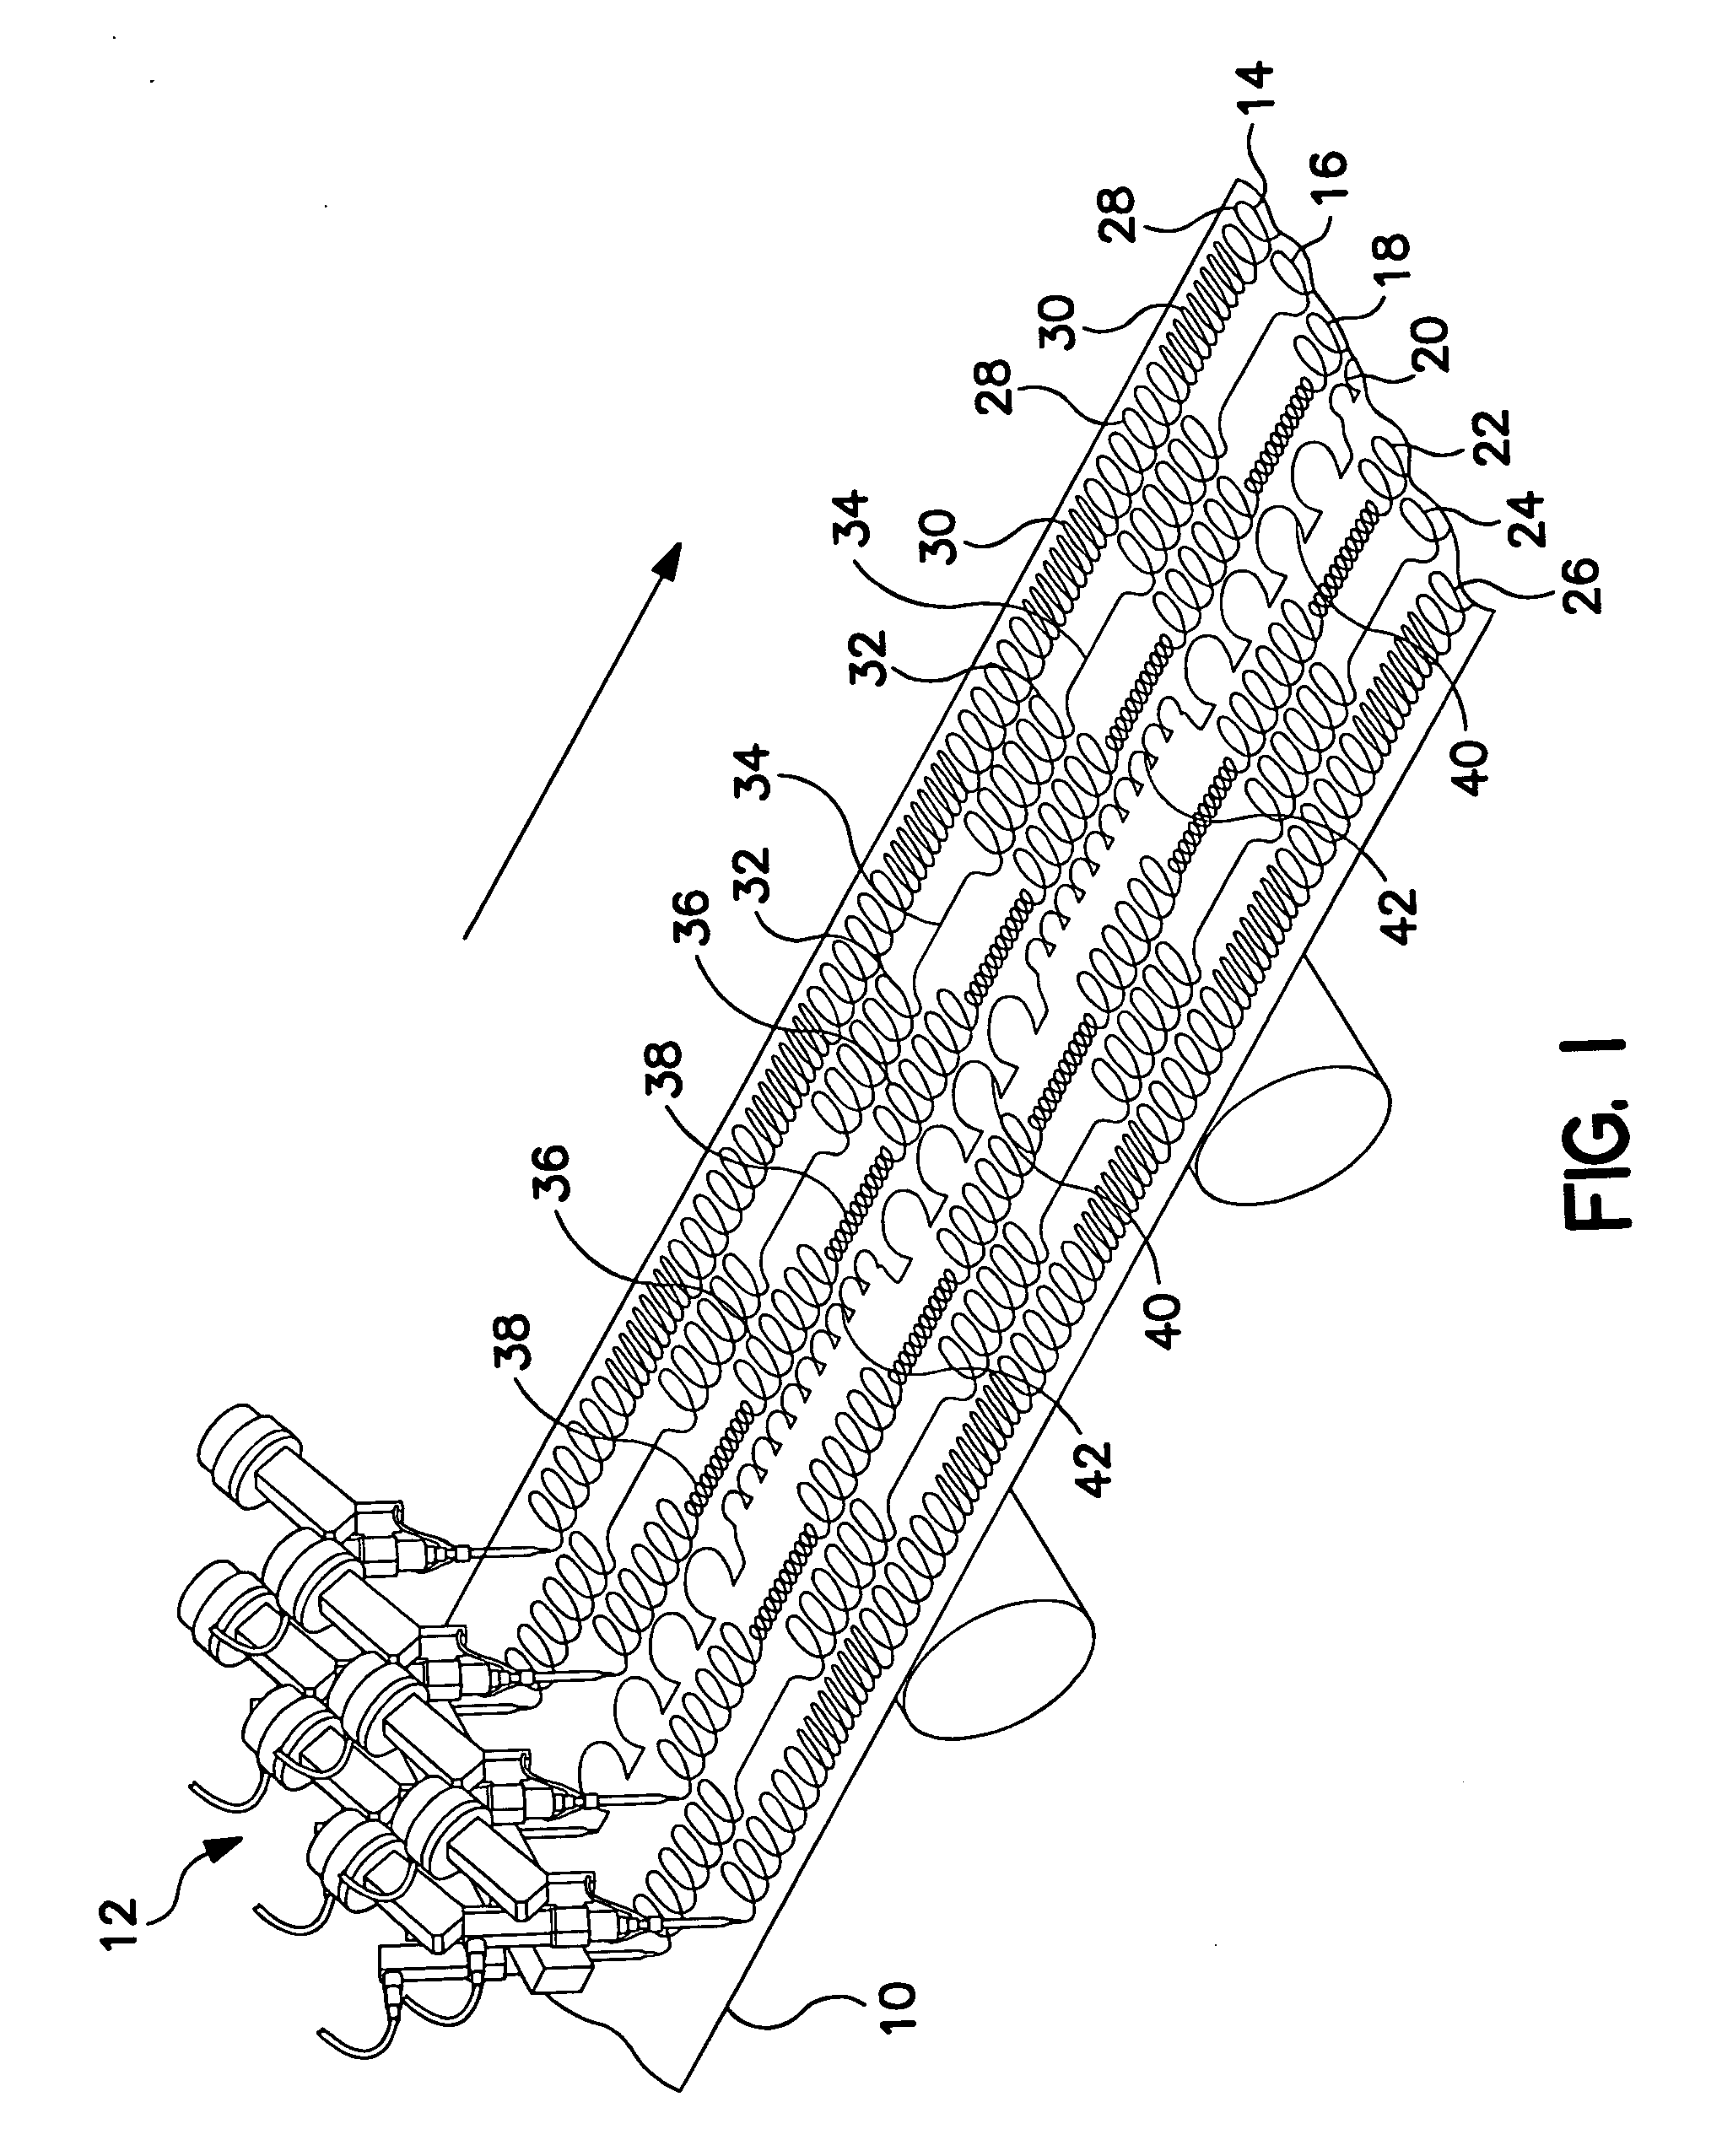 Use of swirl-like adhesive patterns in the formation of absorbent articles